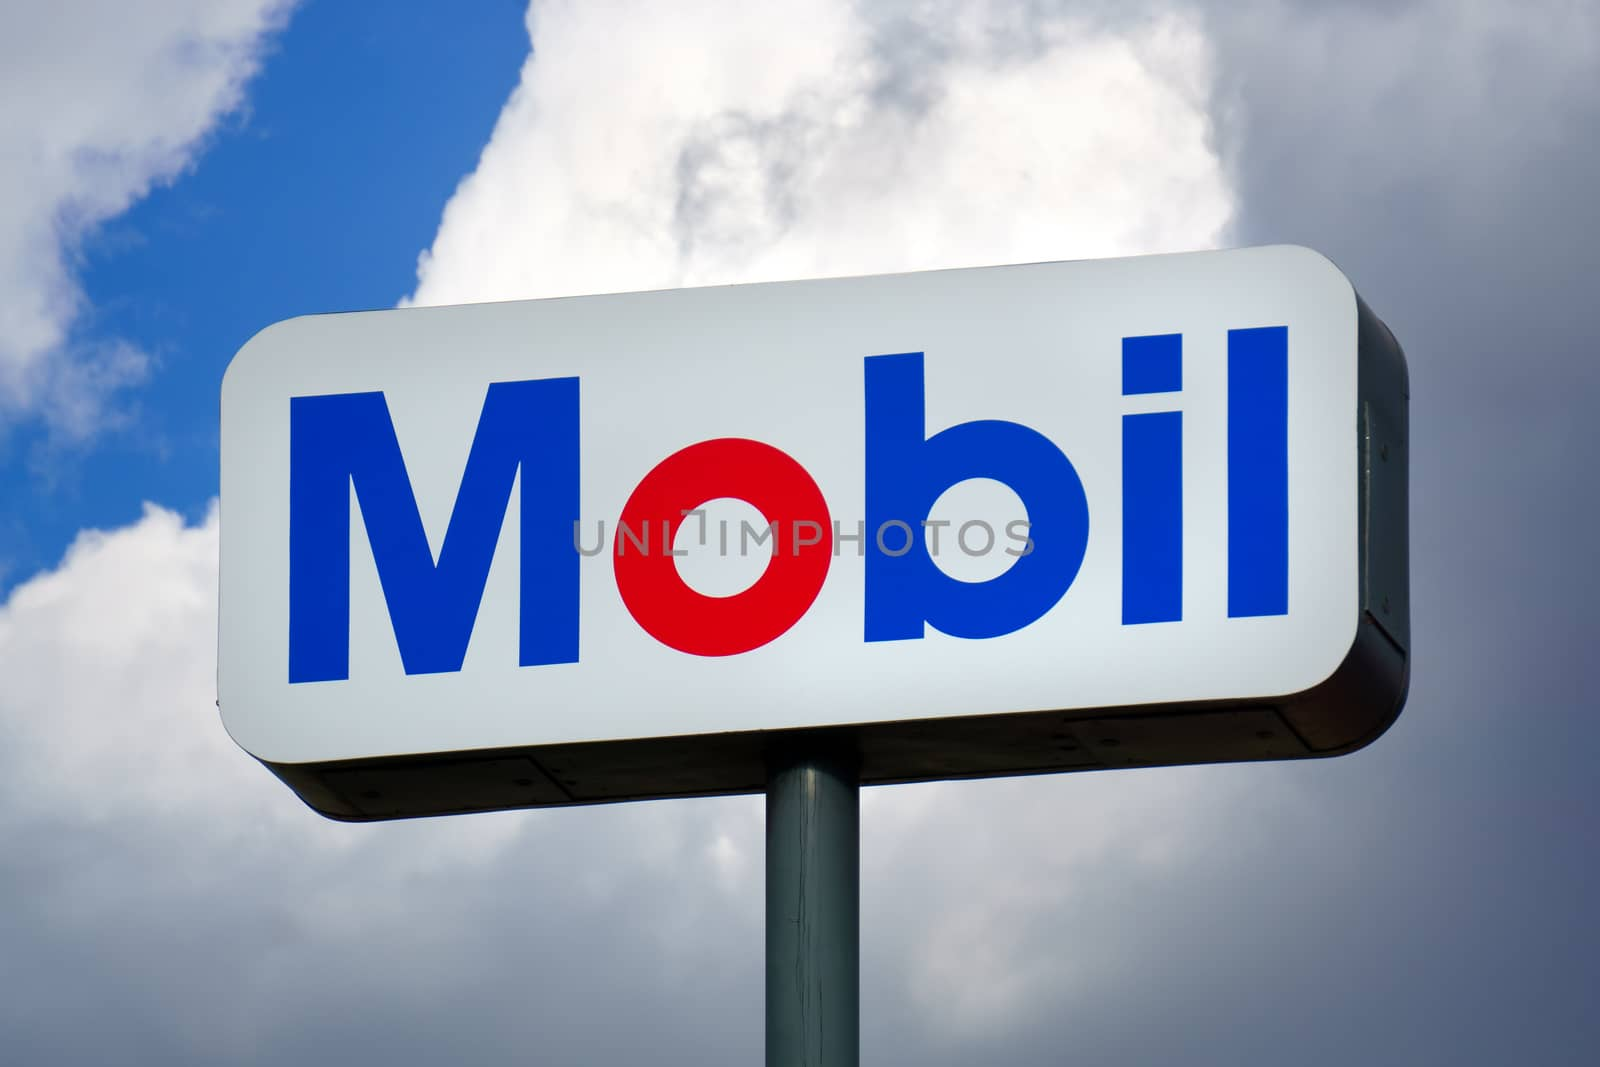                                              Mobil gas station, Image by [wolterk] from: unlimphotos